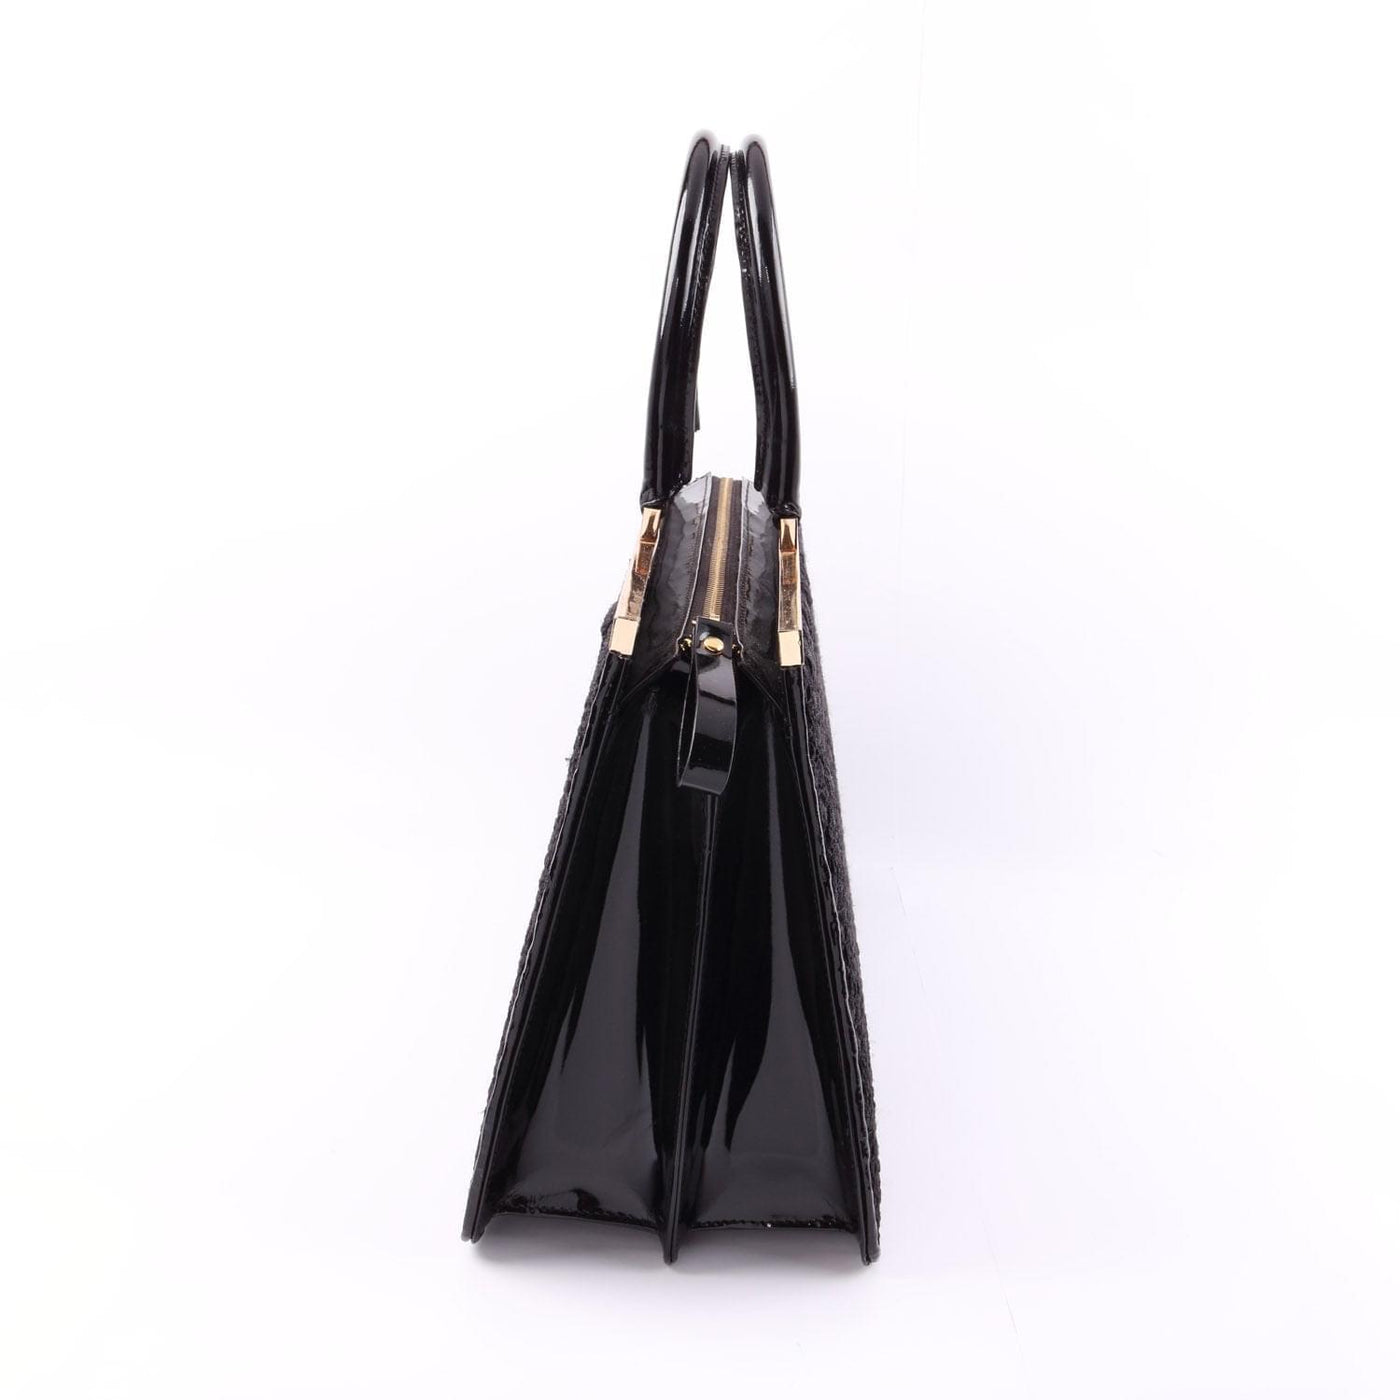 bClassy Black - Women's tote bag for everyday use